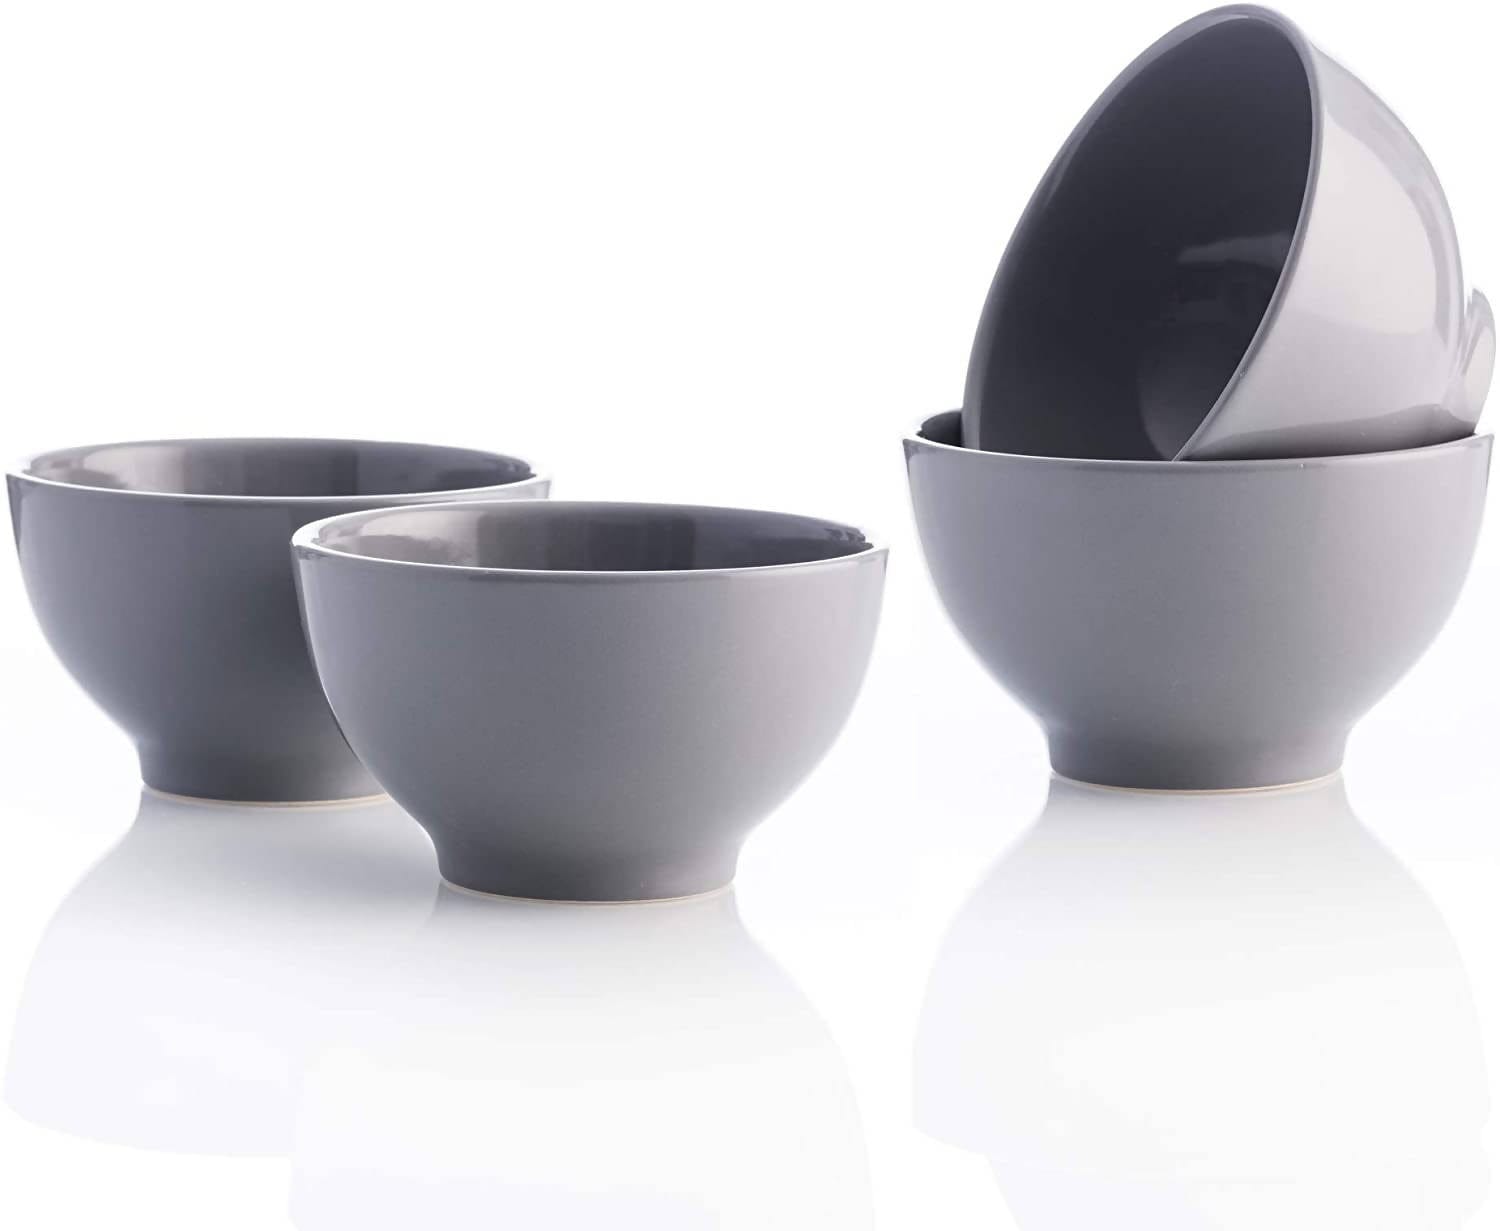 Bennetton 4 Piece Bowl Set (Grey) has a timeless tableware shape which is perfect for lunchtime soup or desserts - 0249